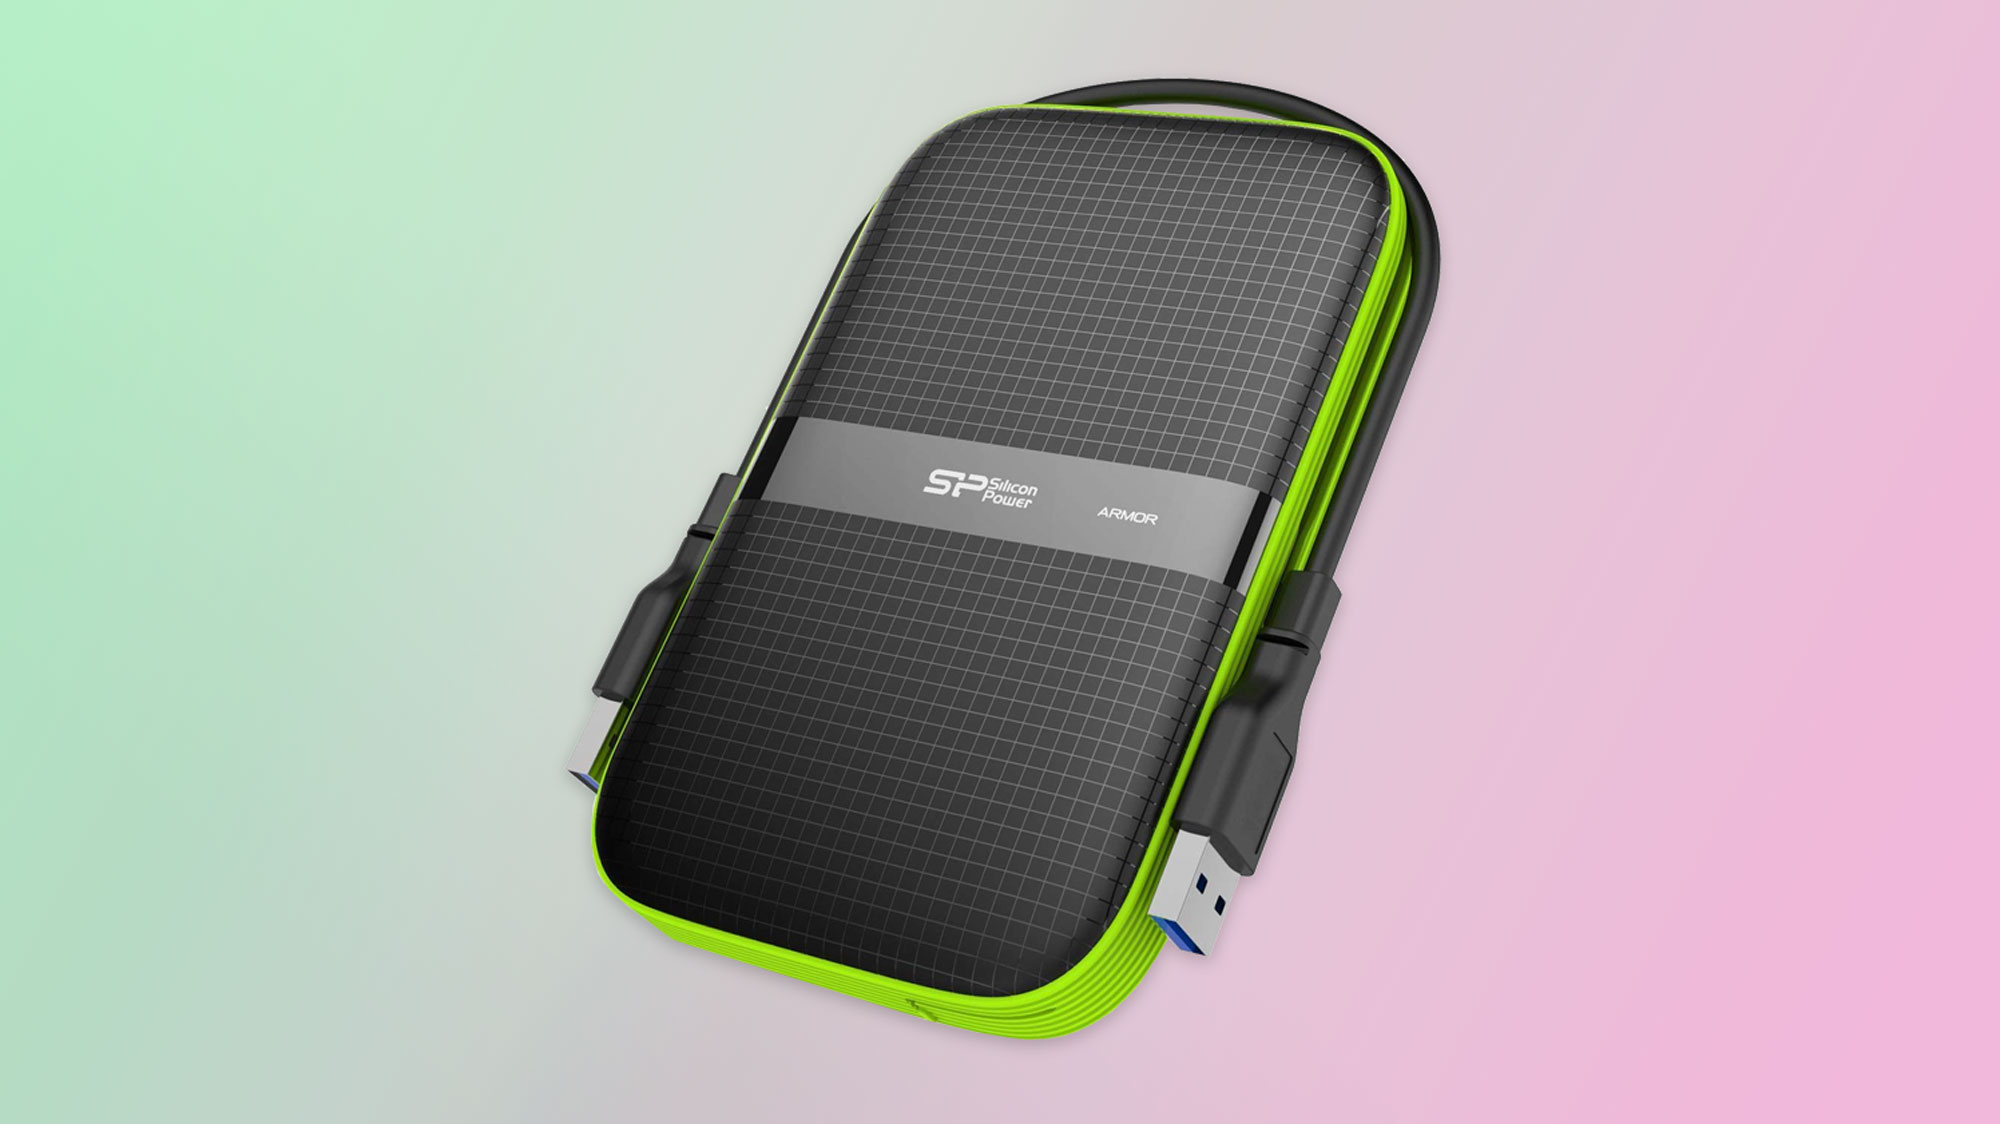 Best external hard drives: Silicon Power Shockproof 2 TB